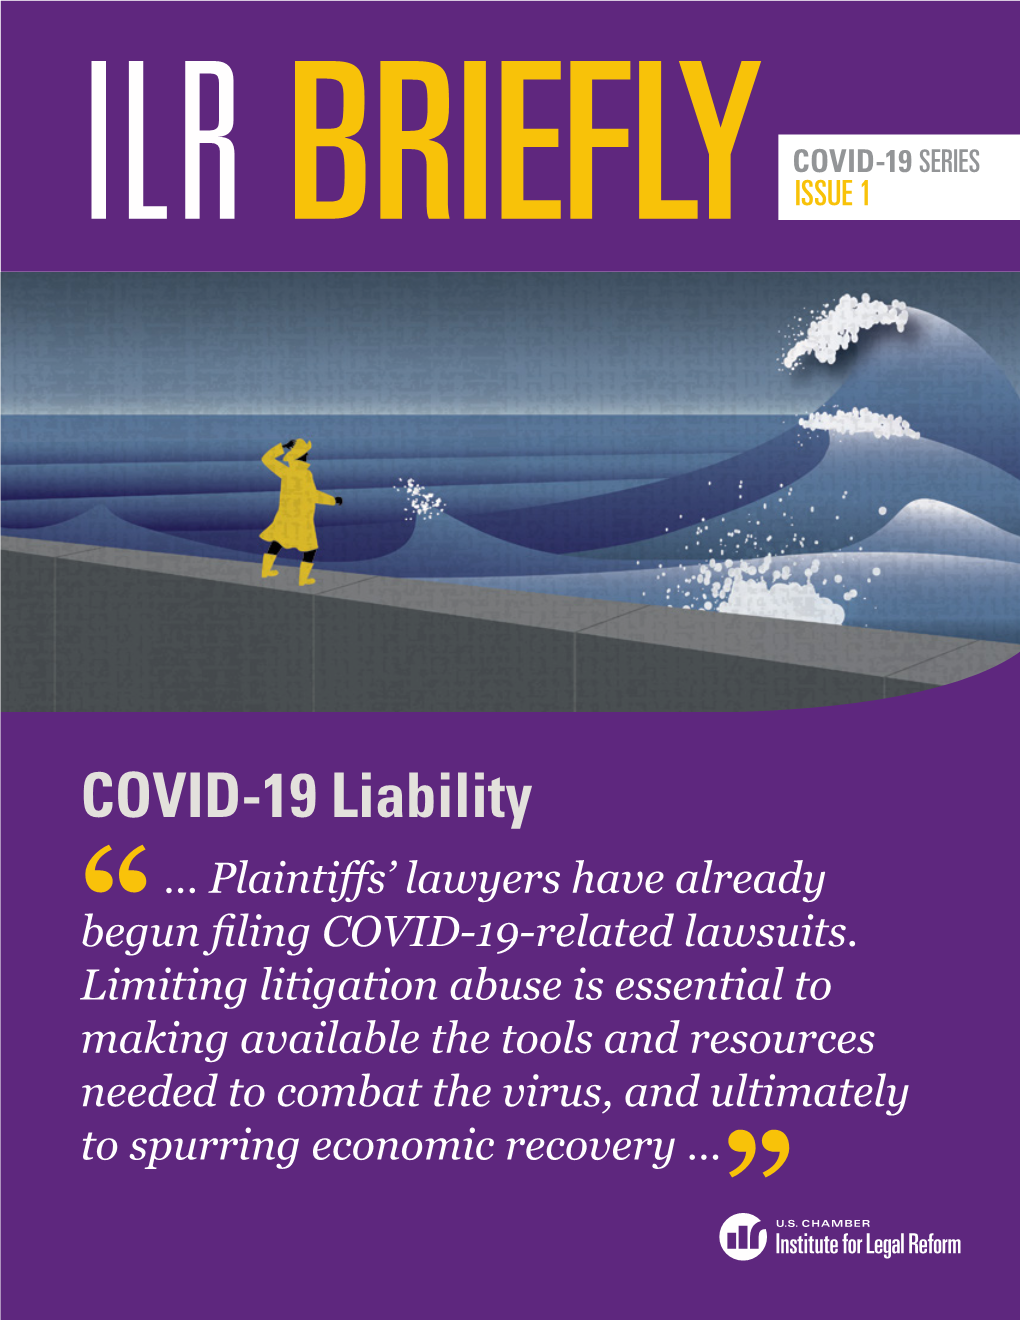 COVID-19 Liability … Plaintiffs’ Lawyers Have Already “Begun Filing COVID-19-Related Lawsuits